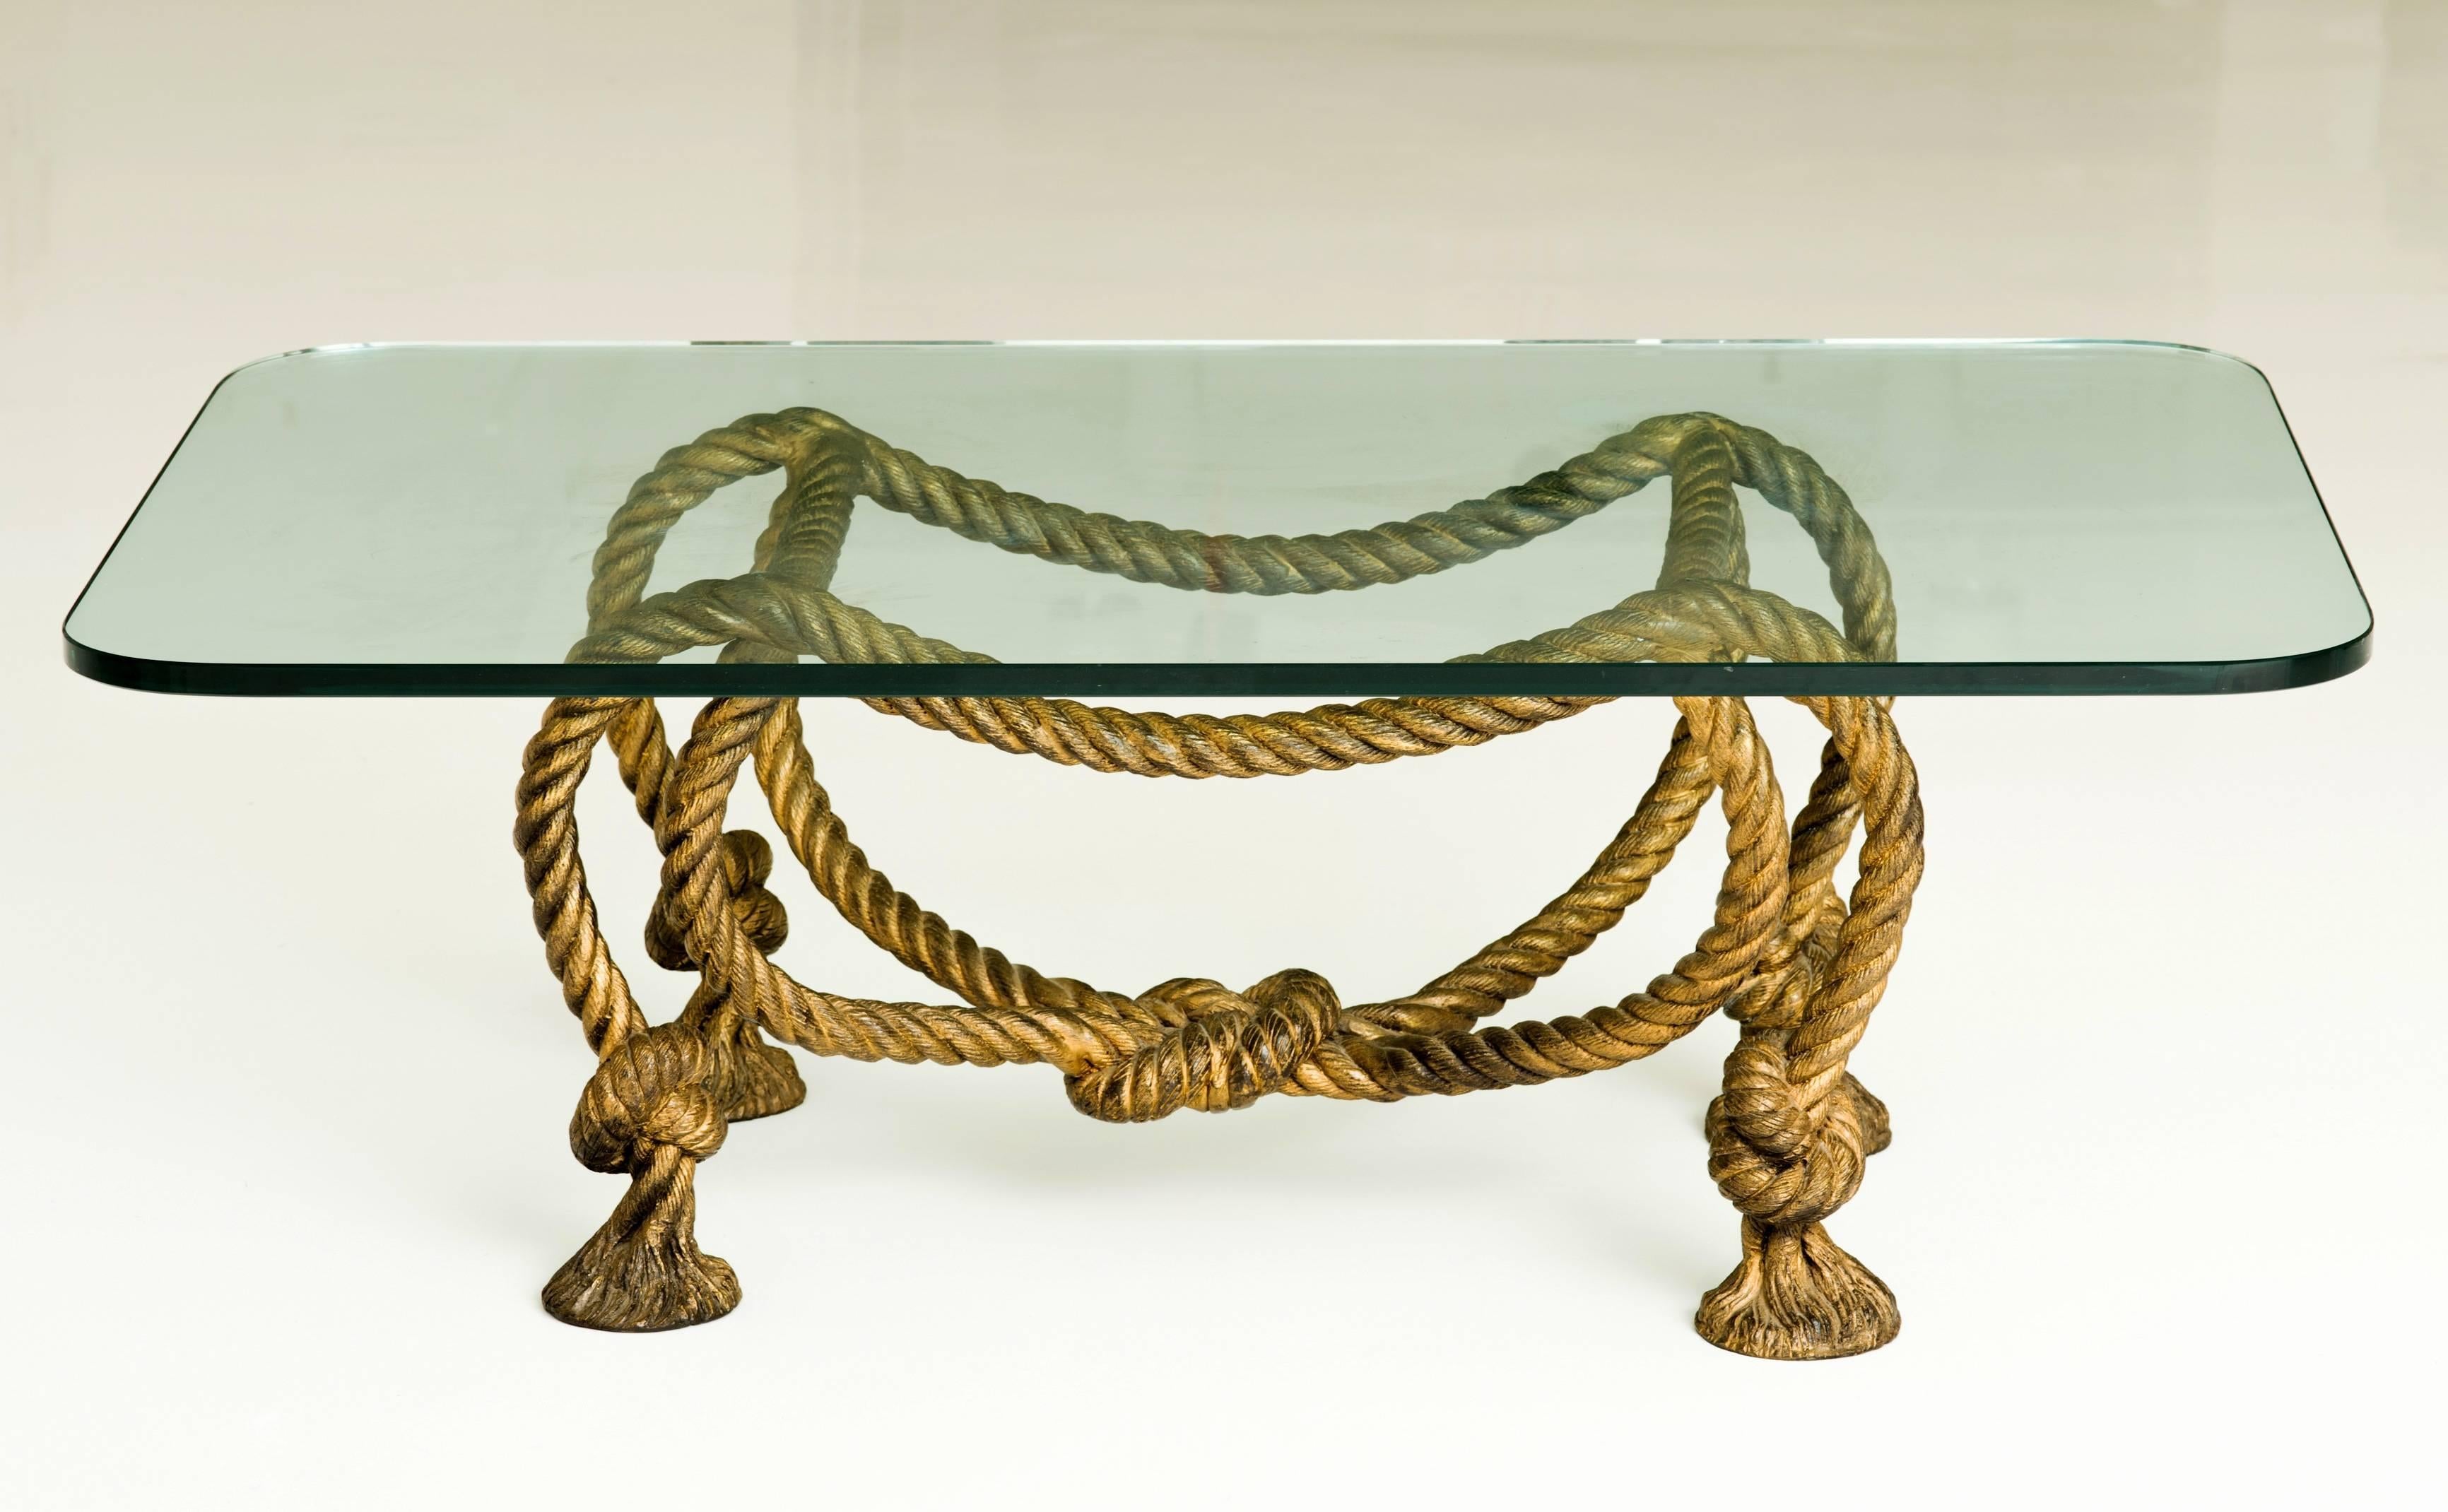 Stunning rope coffee table in the style of Maison Jansen with twisted knots and tassel feet. This gilt metal French or Italian Table with rectangular glass top is beautifully crafted and came from a collection with many Karl Springer originals.